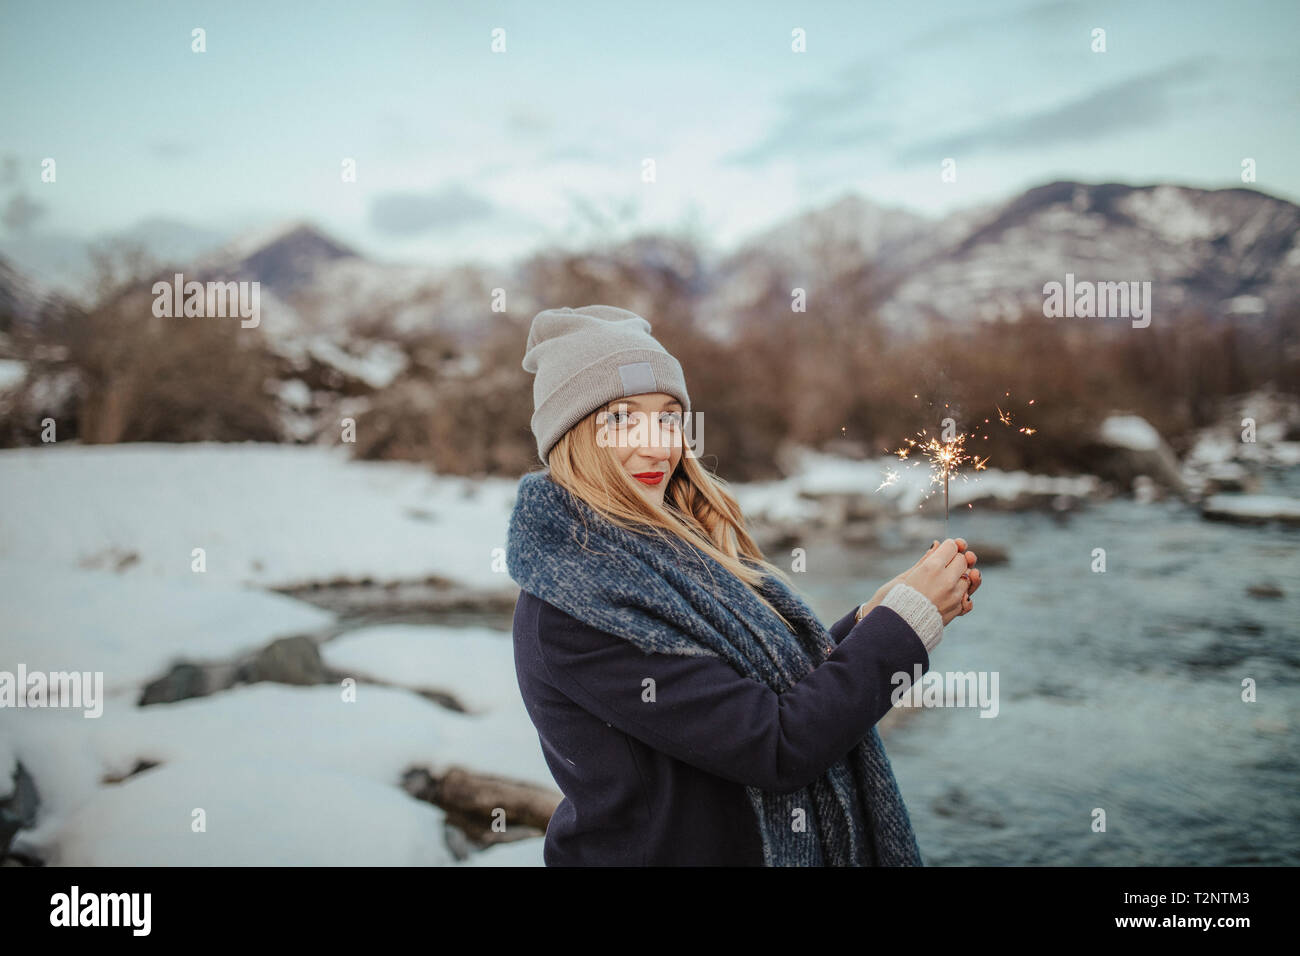 Woman in knitted hat holding sparkler on snow covered riverbank, portrait,  Orta, Piemonte, Italy Stock Photo